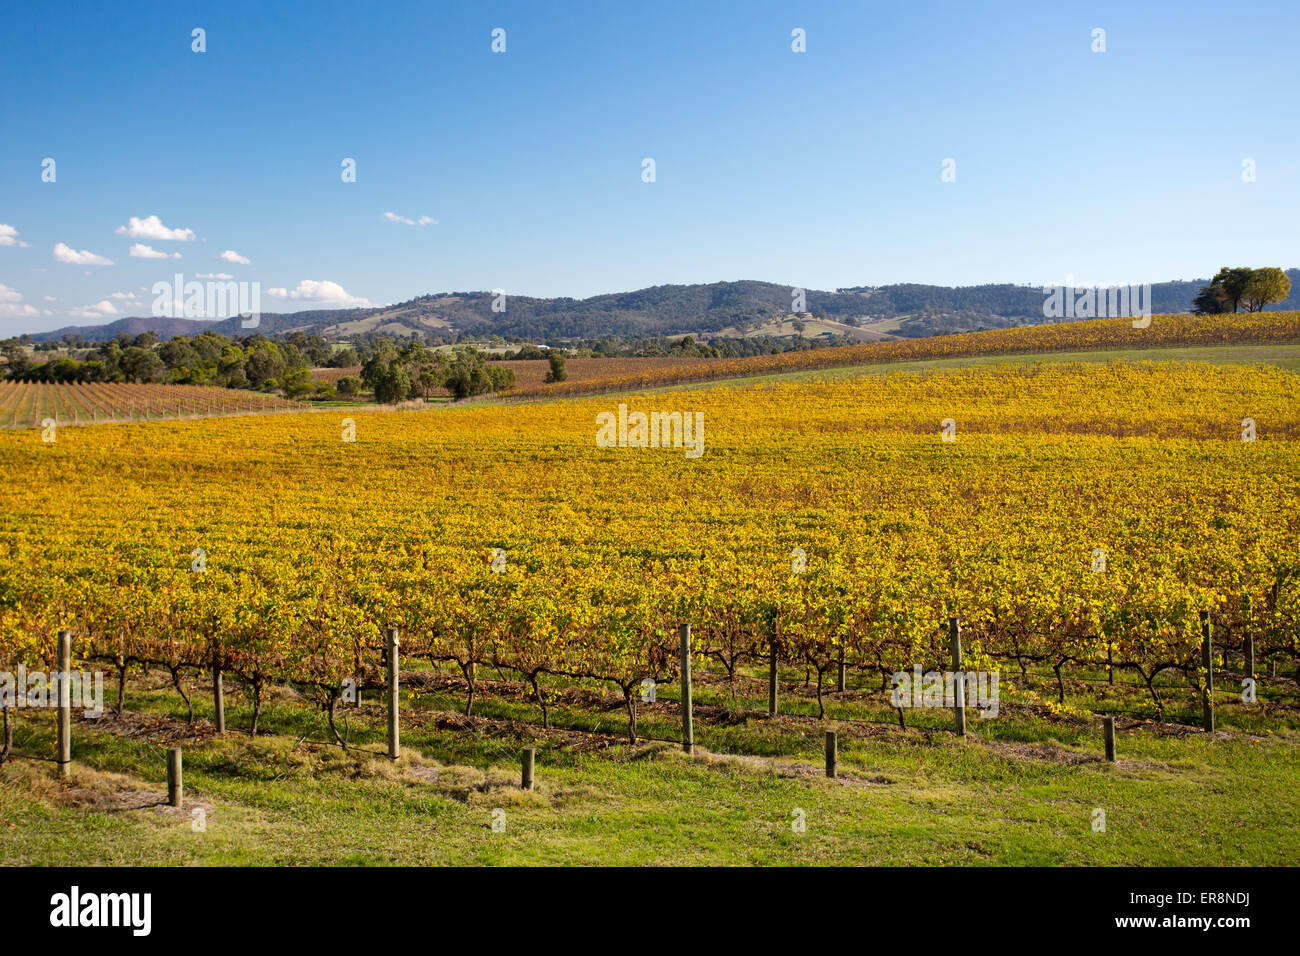 Lush golden vines in autumn at a winery in the Yarra Valley, Victoria, Australia Stock Photo